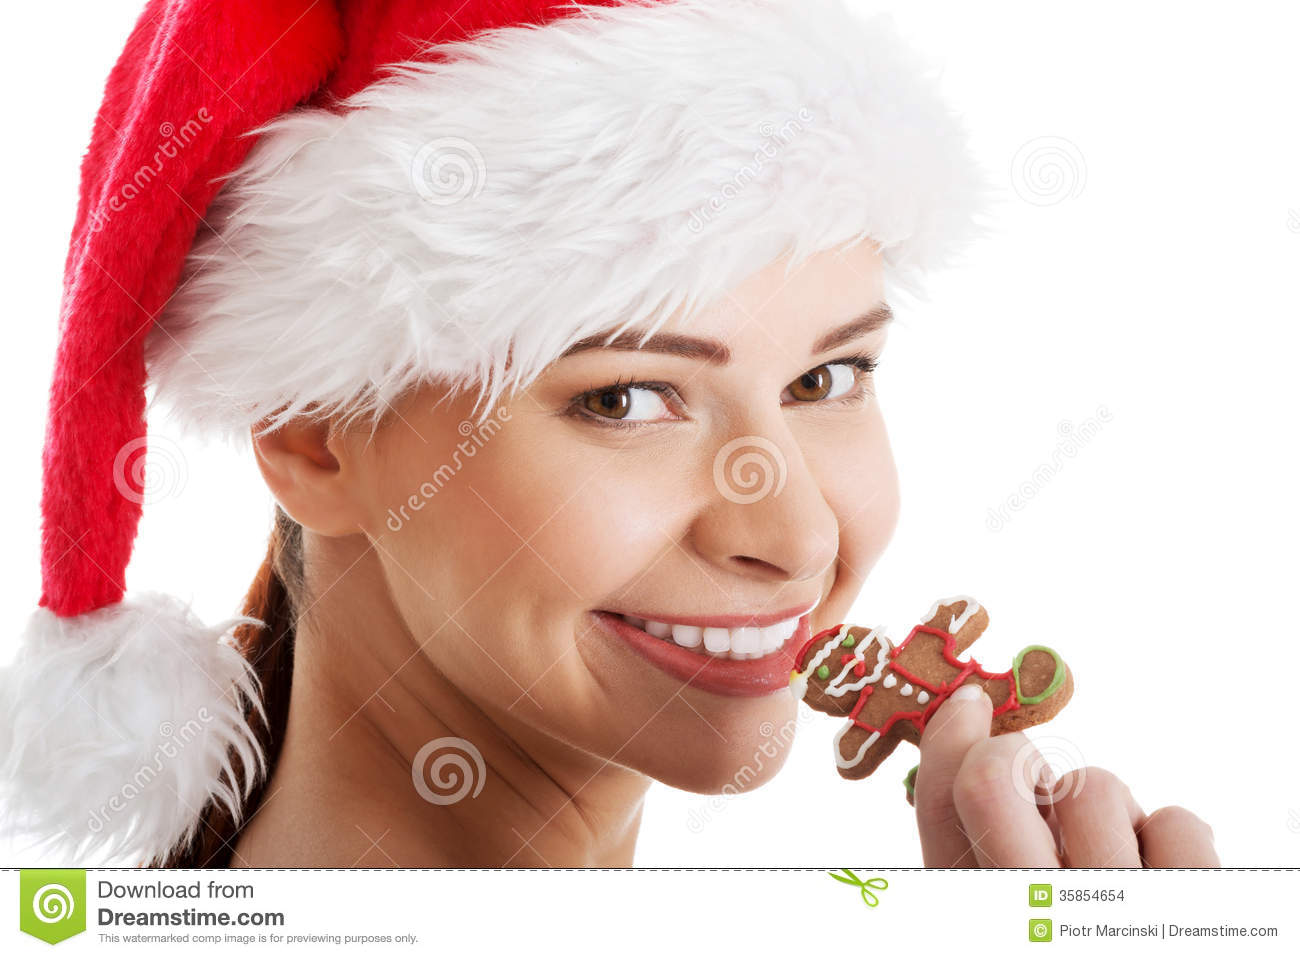 Beautiful Woman In Santa Hat Eating A Cookie  Stock Images   Image